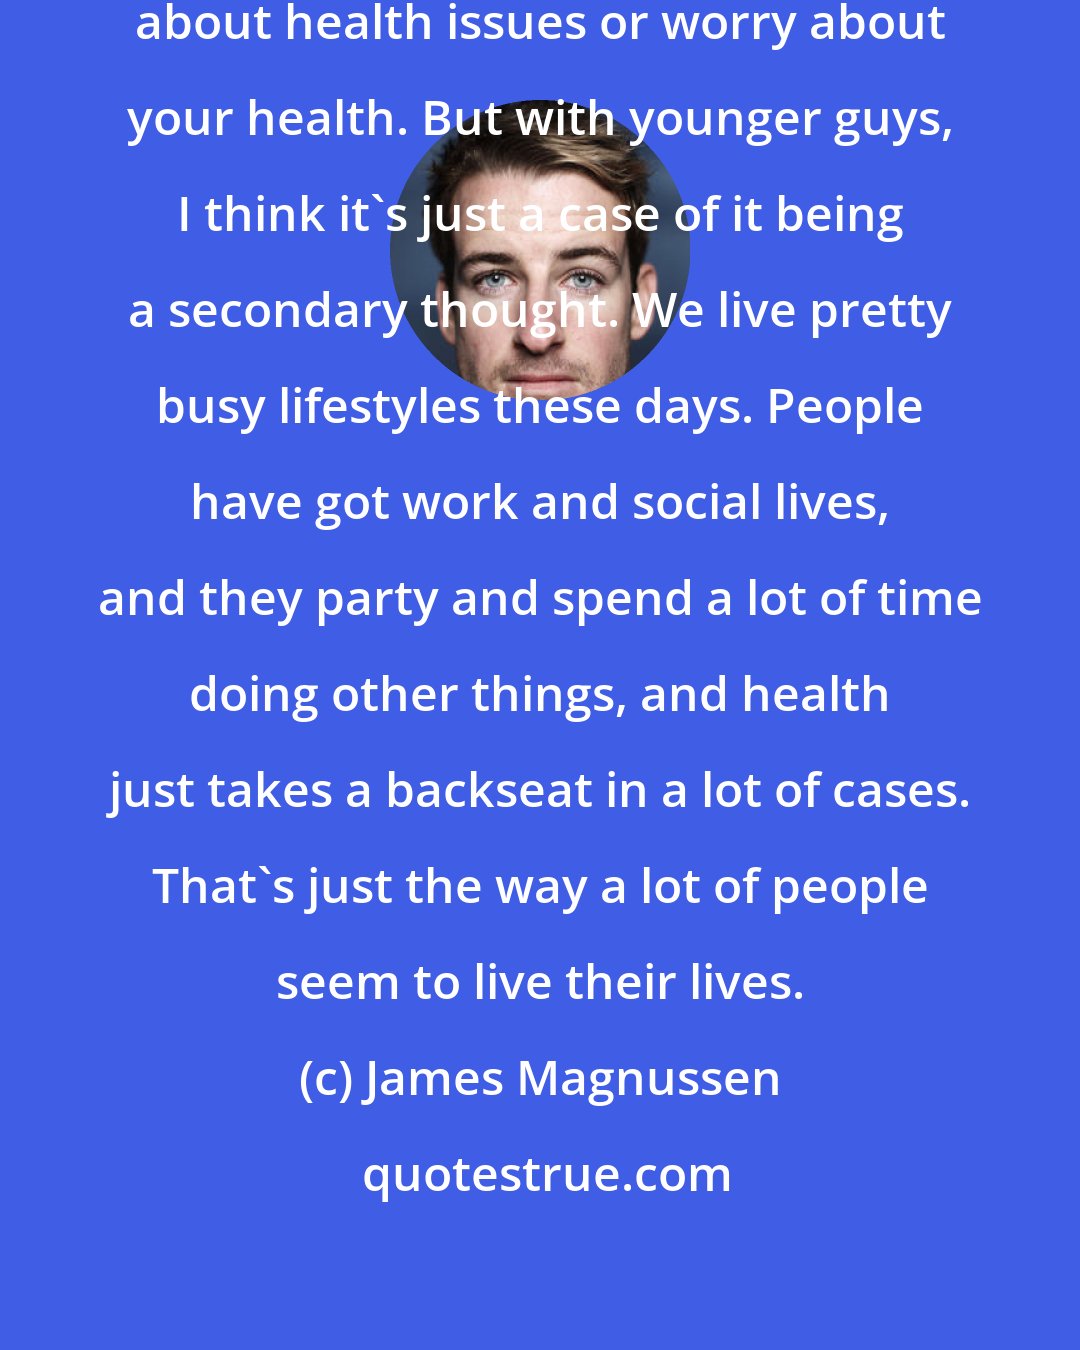 James Magnussen: It can be seen as 'weak' to complain about health issues or worry about your health. But with younger guys, I think it's just a case of it being a secondary thought. We live pretty busy lifestyles these days. People have got work and social lives, and they party and spend a lot of time doing other things, and health just takes a backseat in a lot of cases. That's just the way a lot of people seem to live their lives.